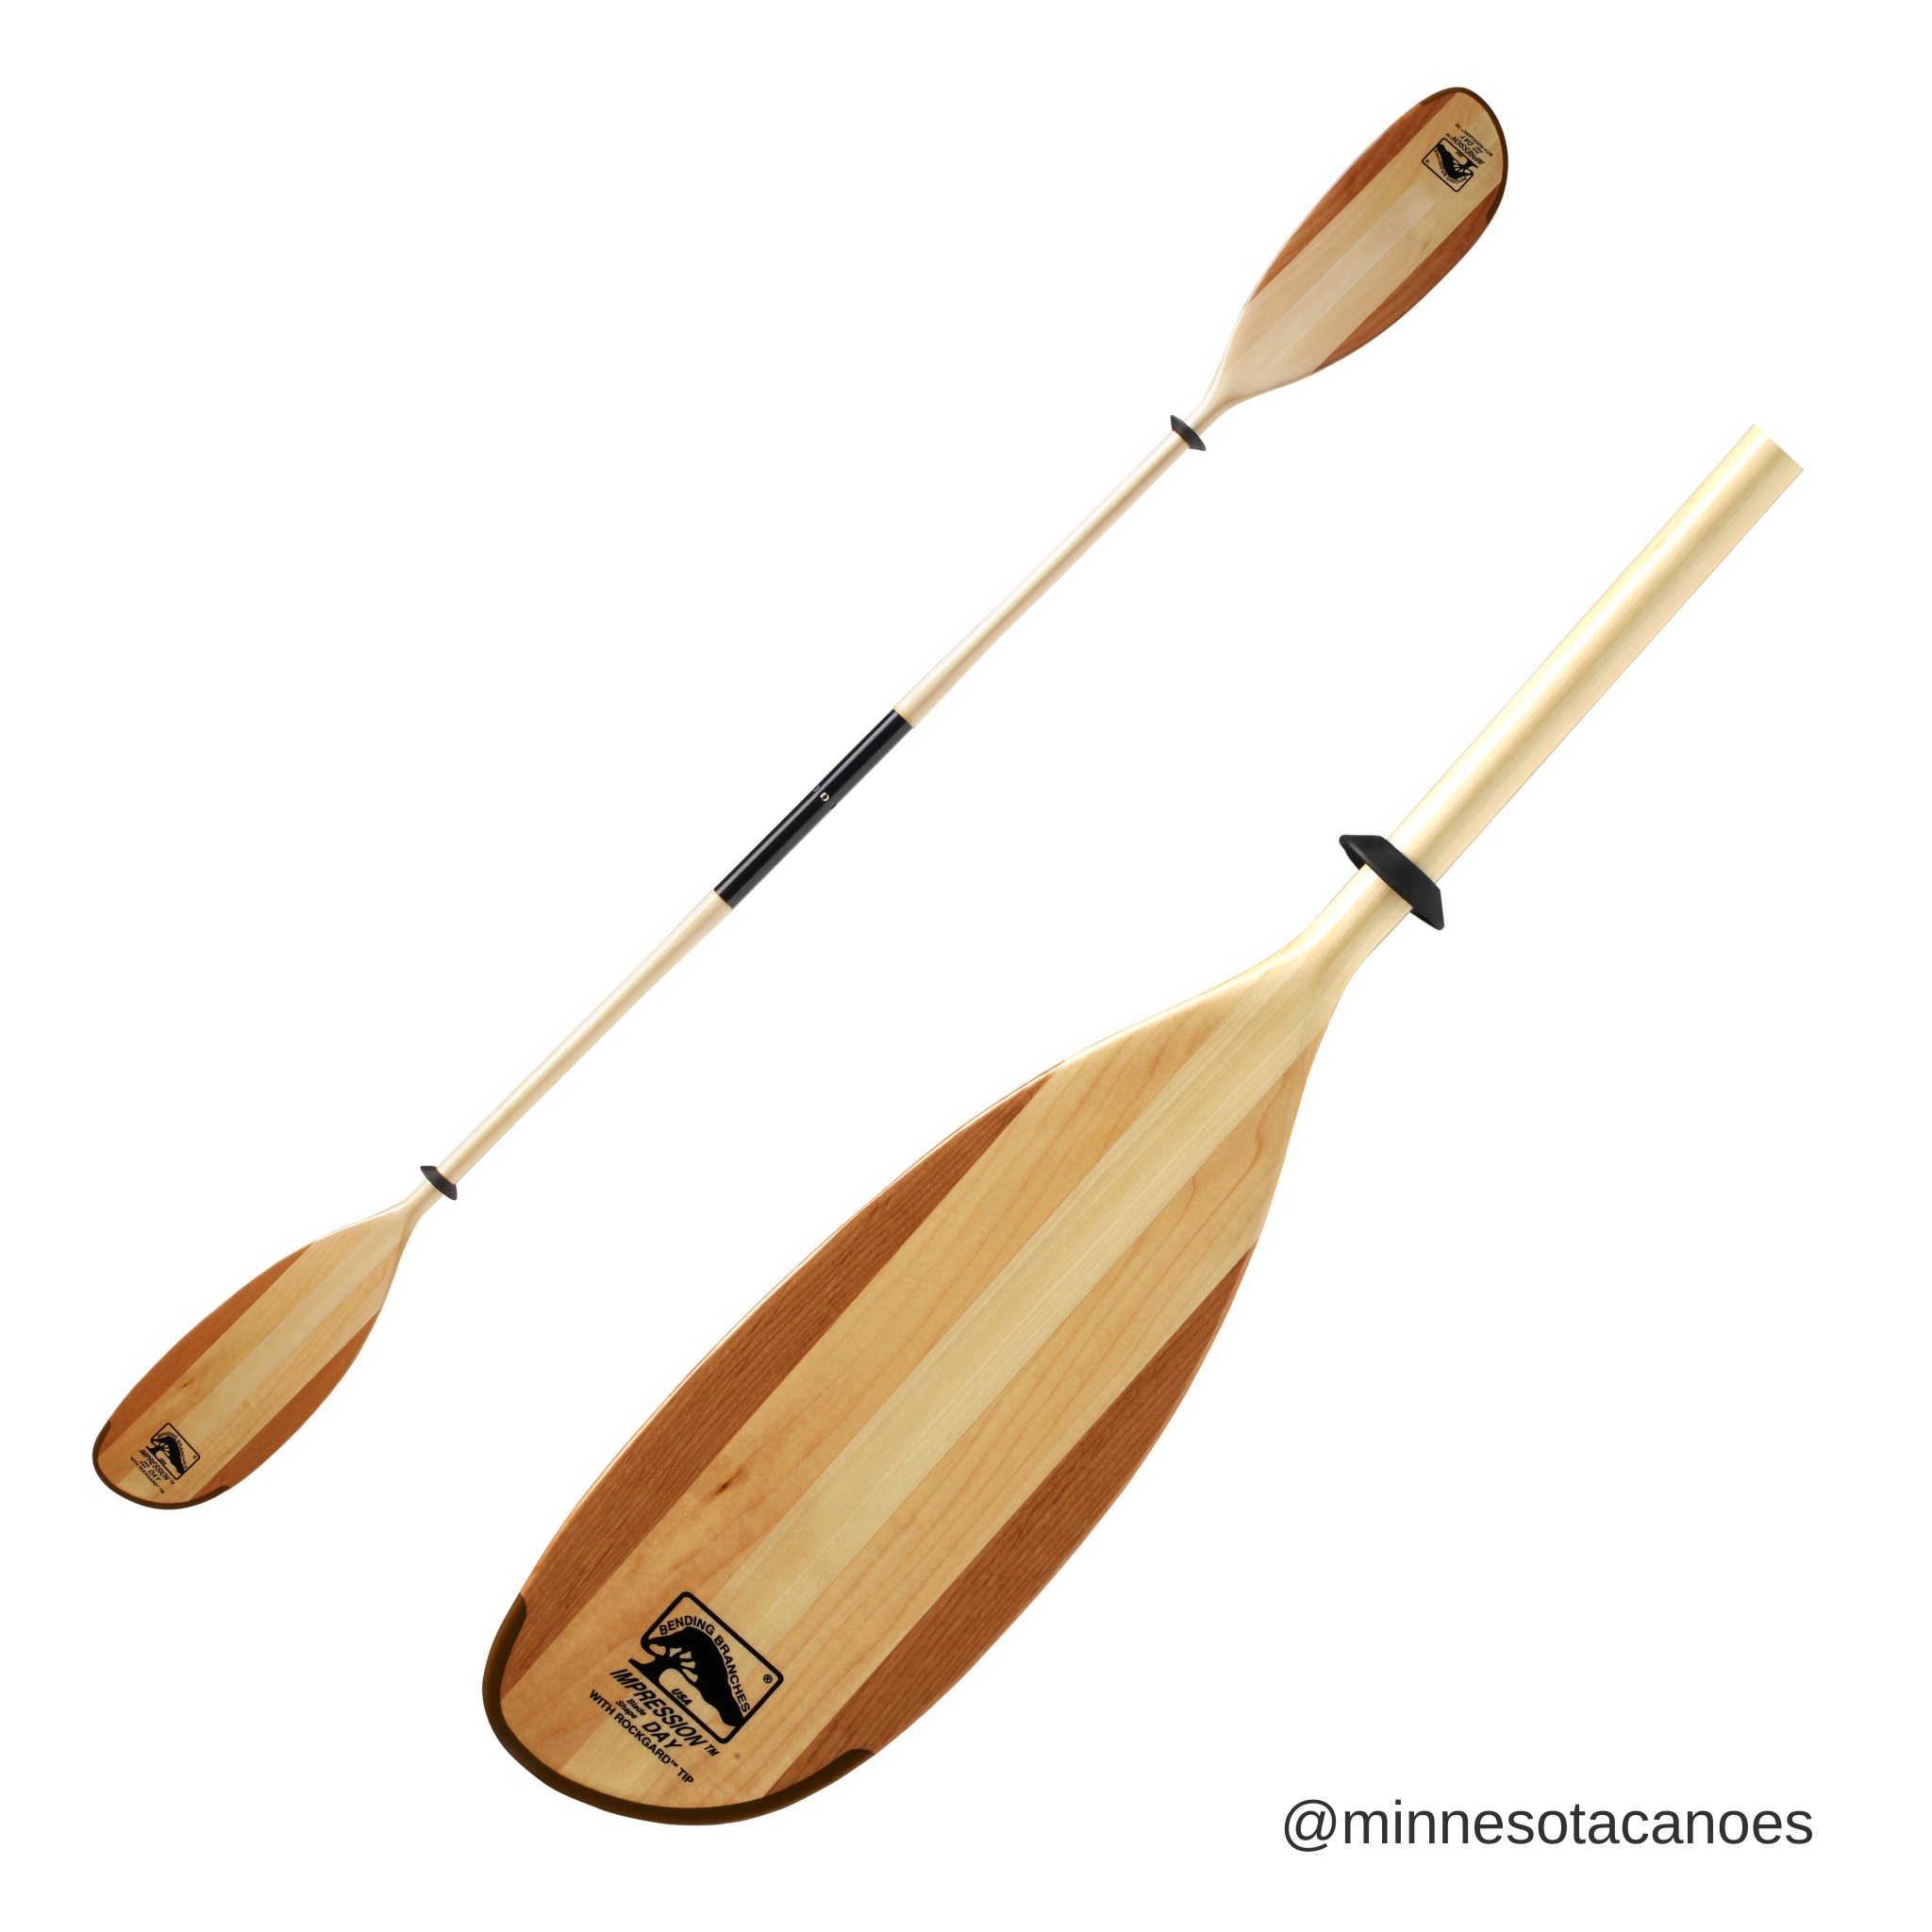 Wooden Double Blade Canoe Paddle (Bending Branches Impression Solo